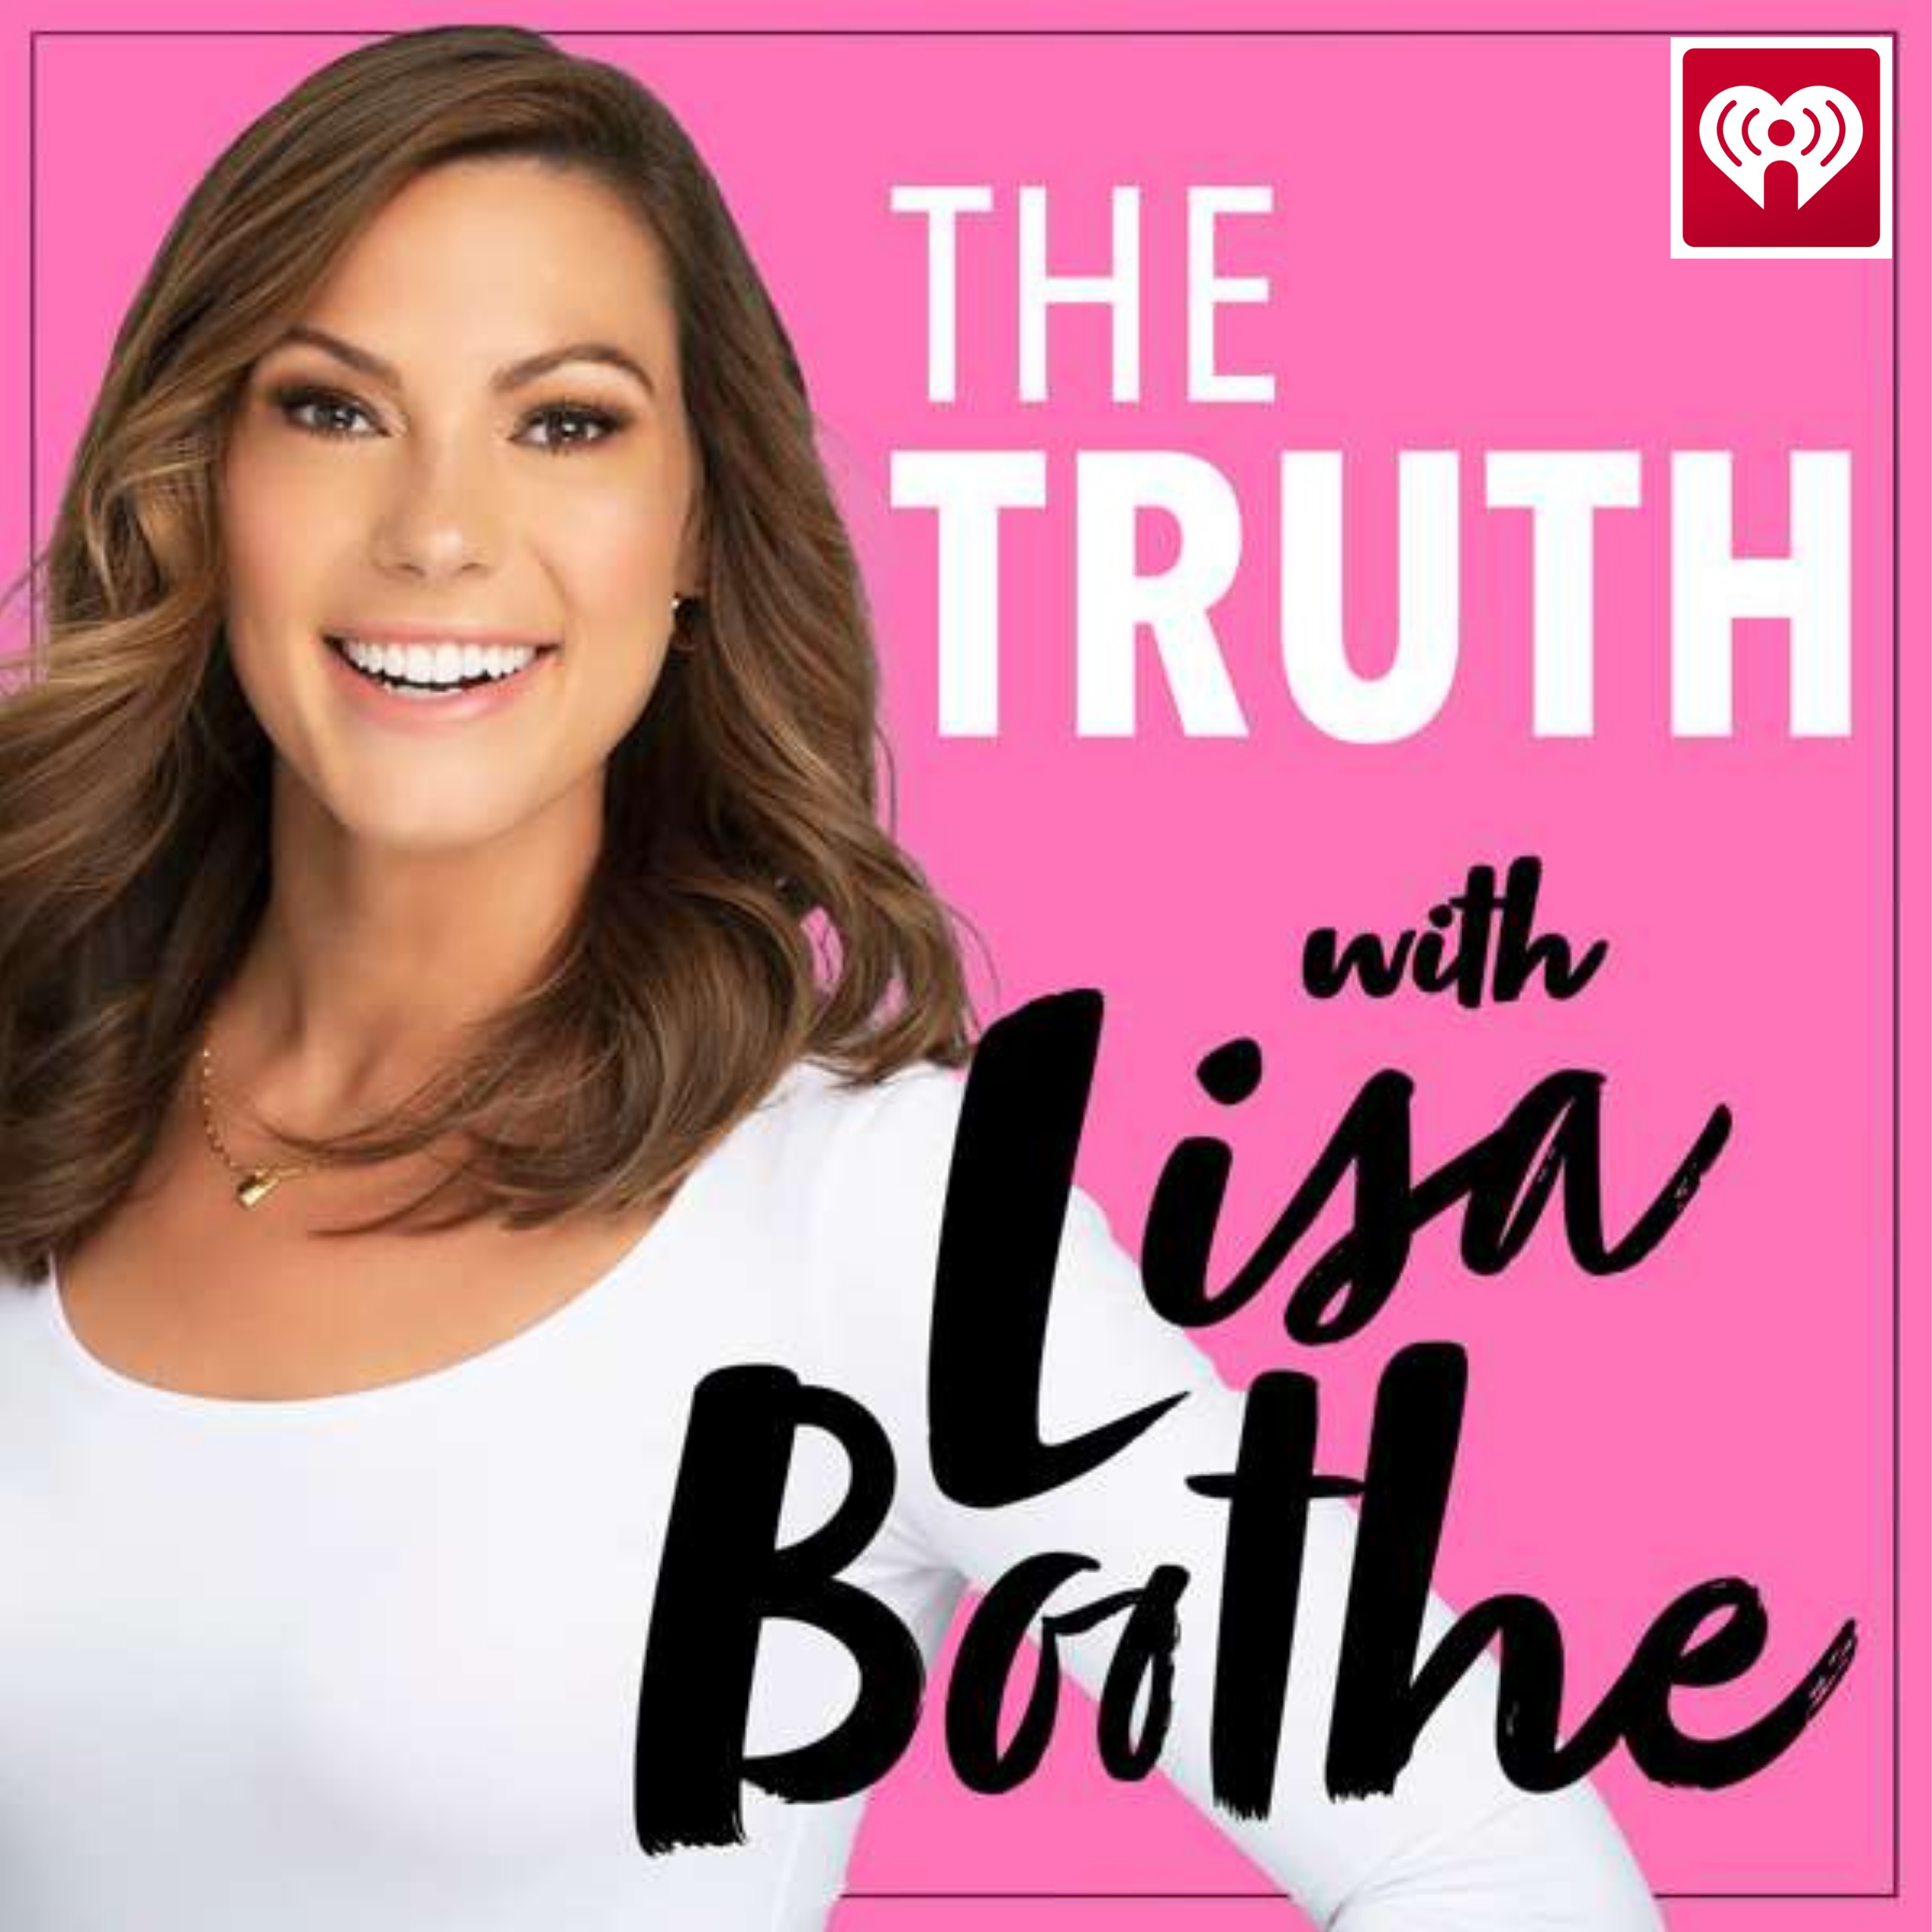 The Truth with Lisa Boothe: Controligarchs with Seamus Bruner